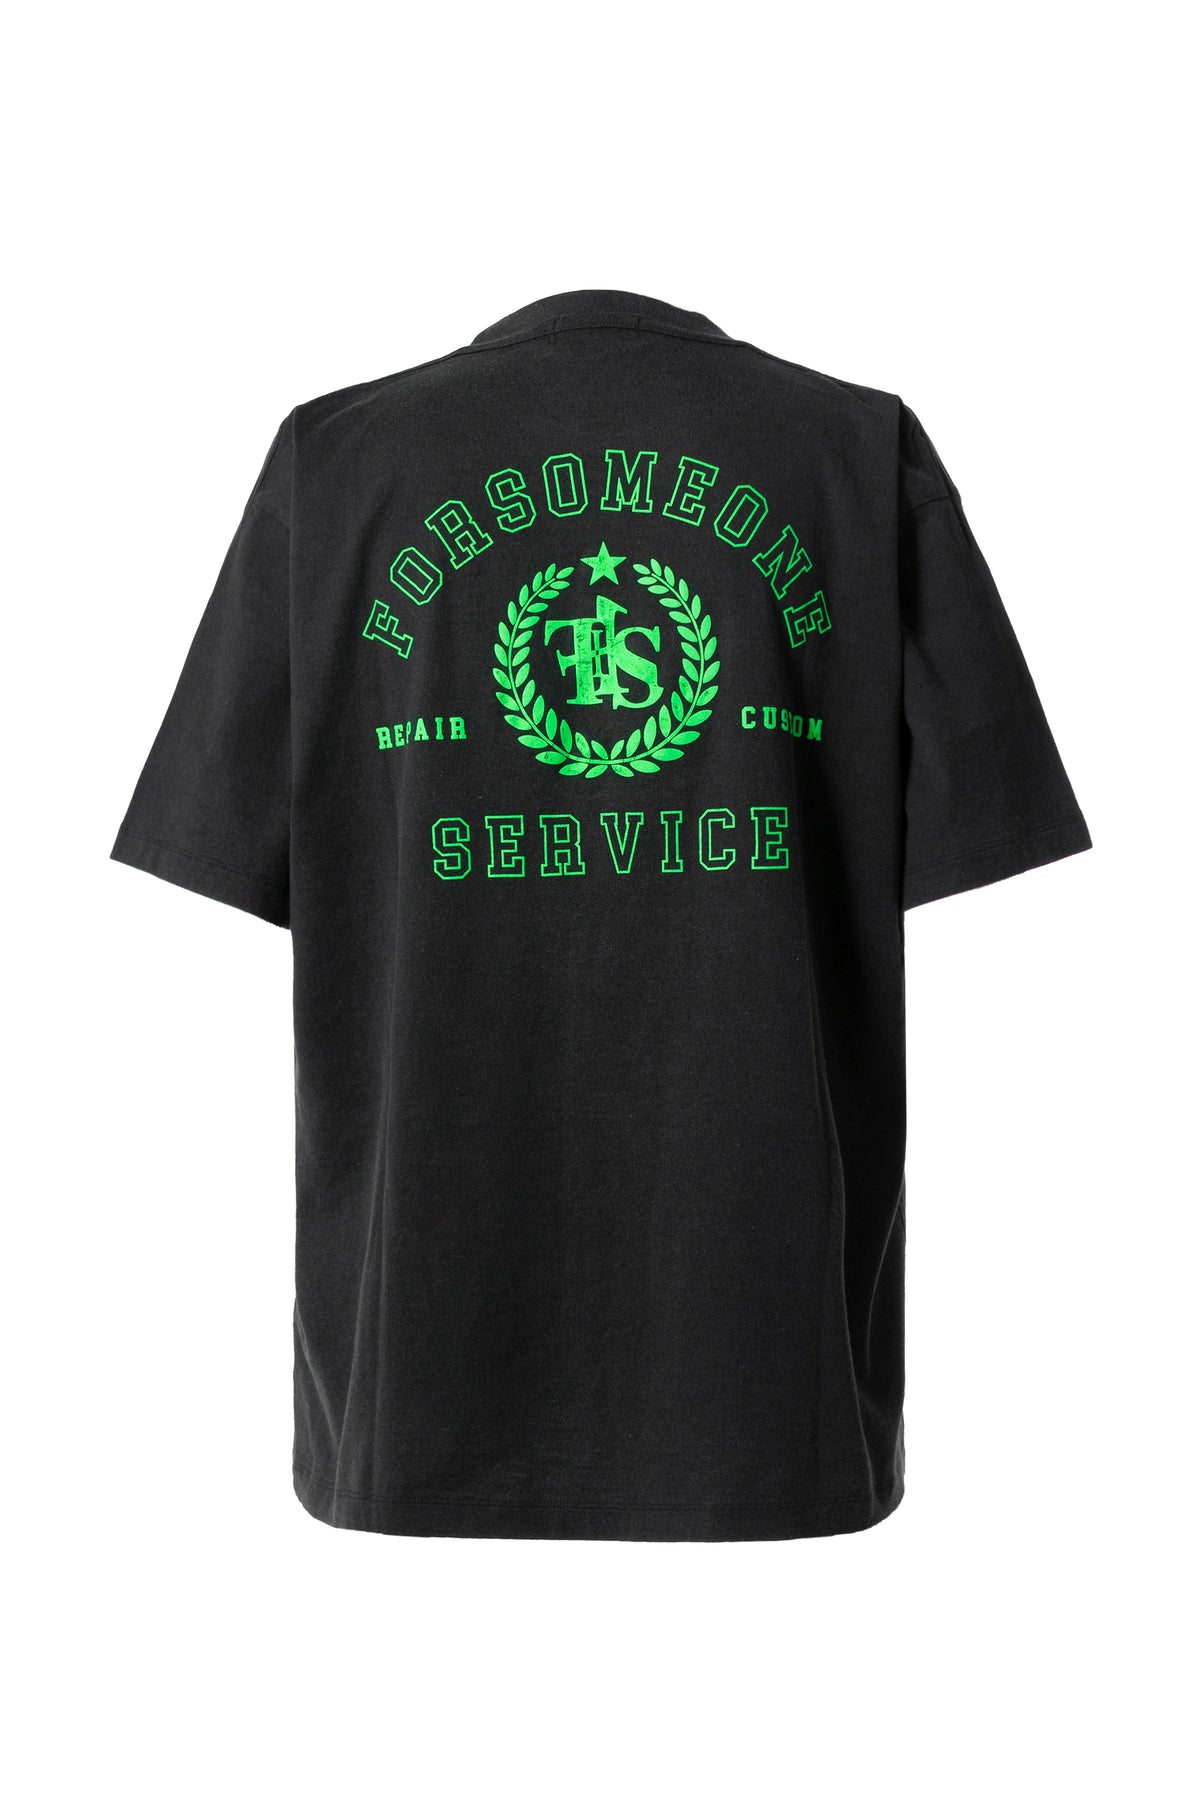 FORSOMEONE SERVICE TEE / GRN